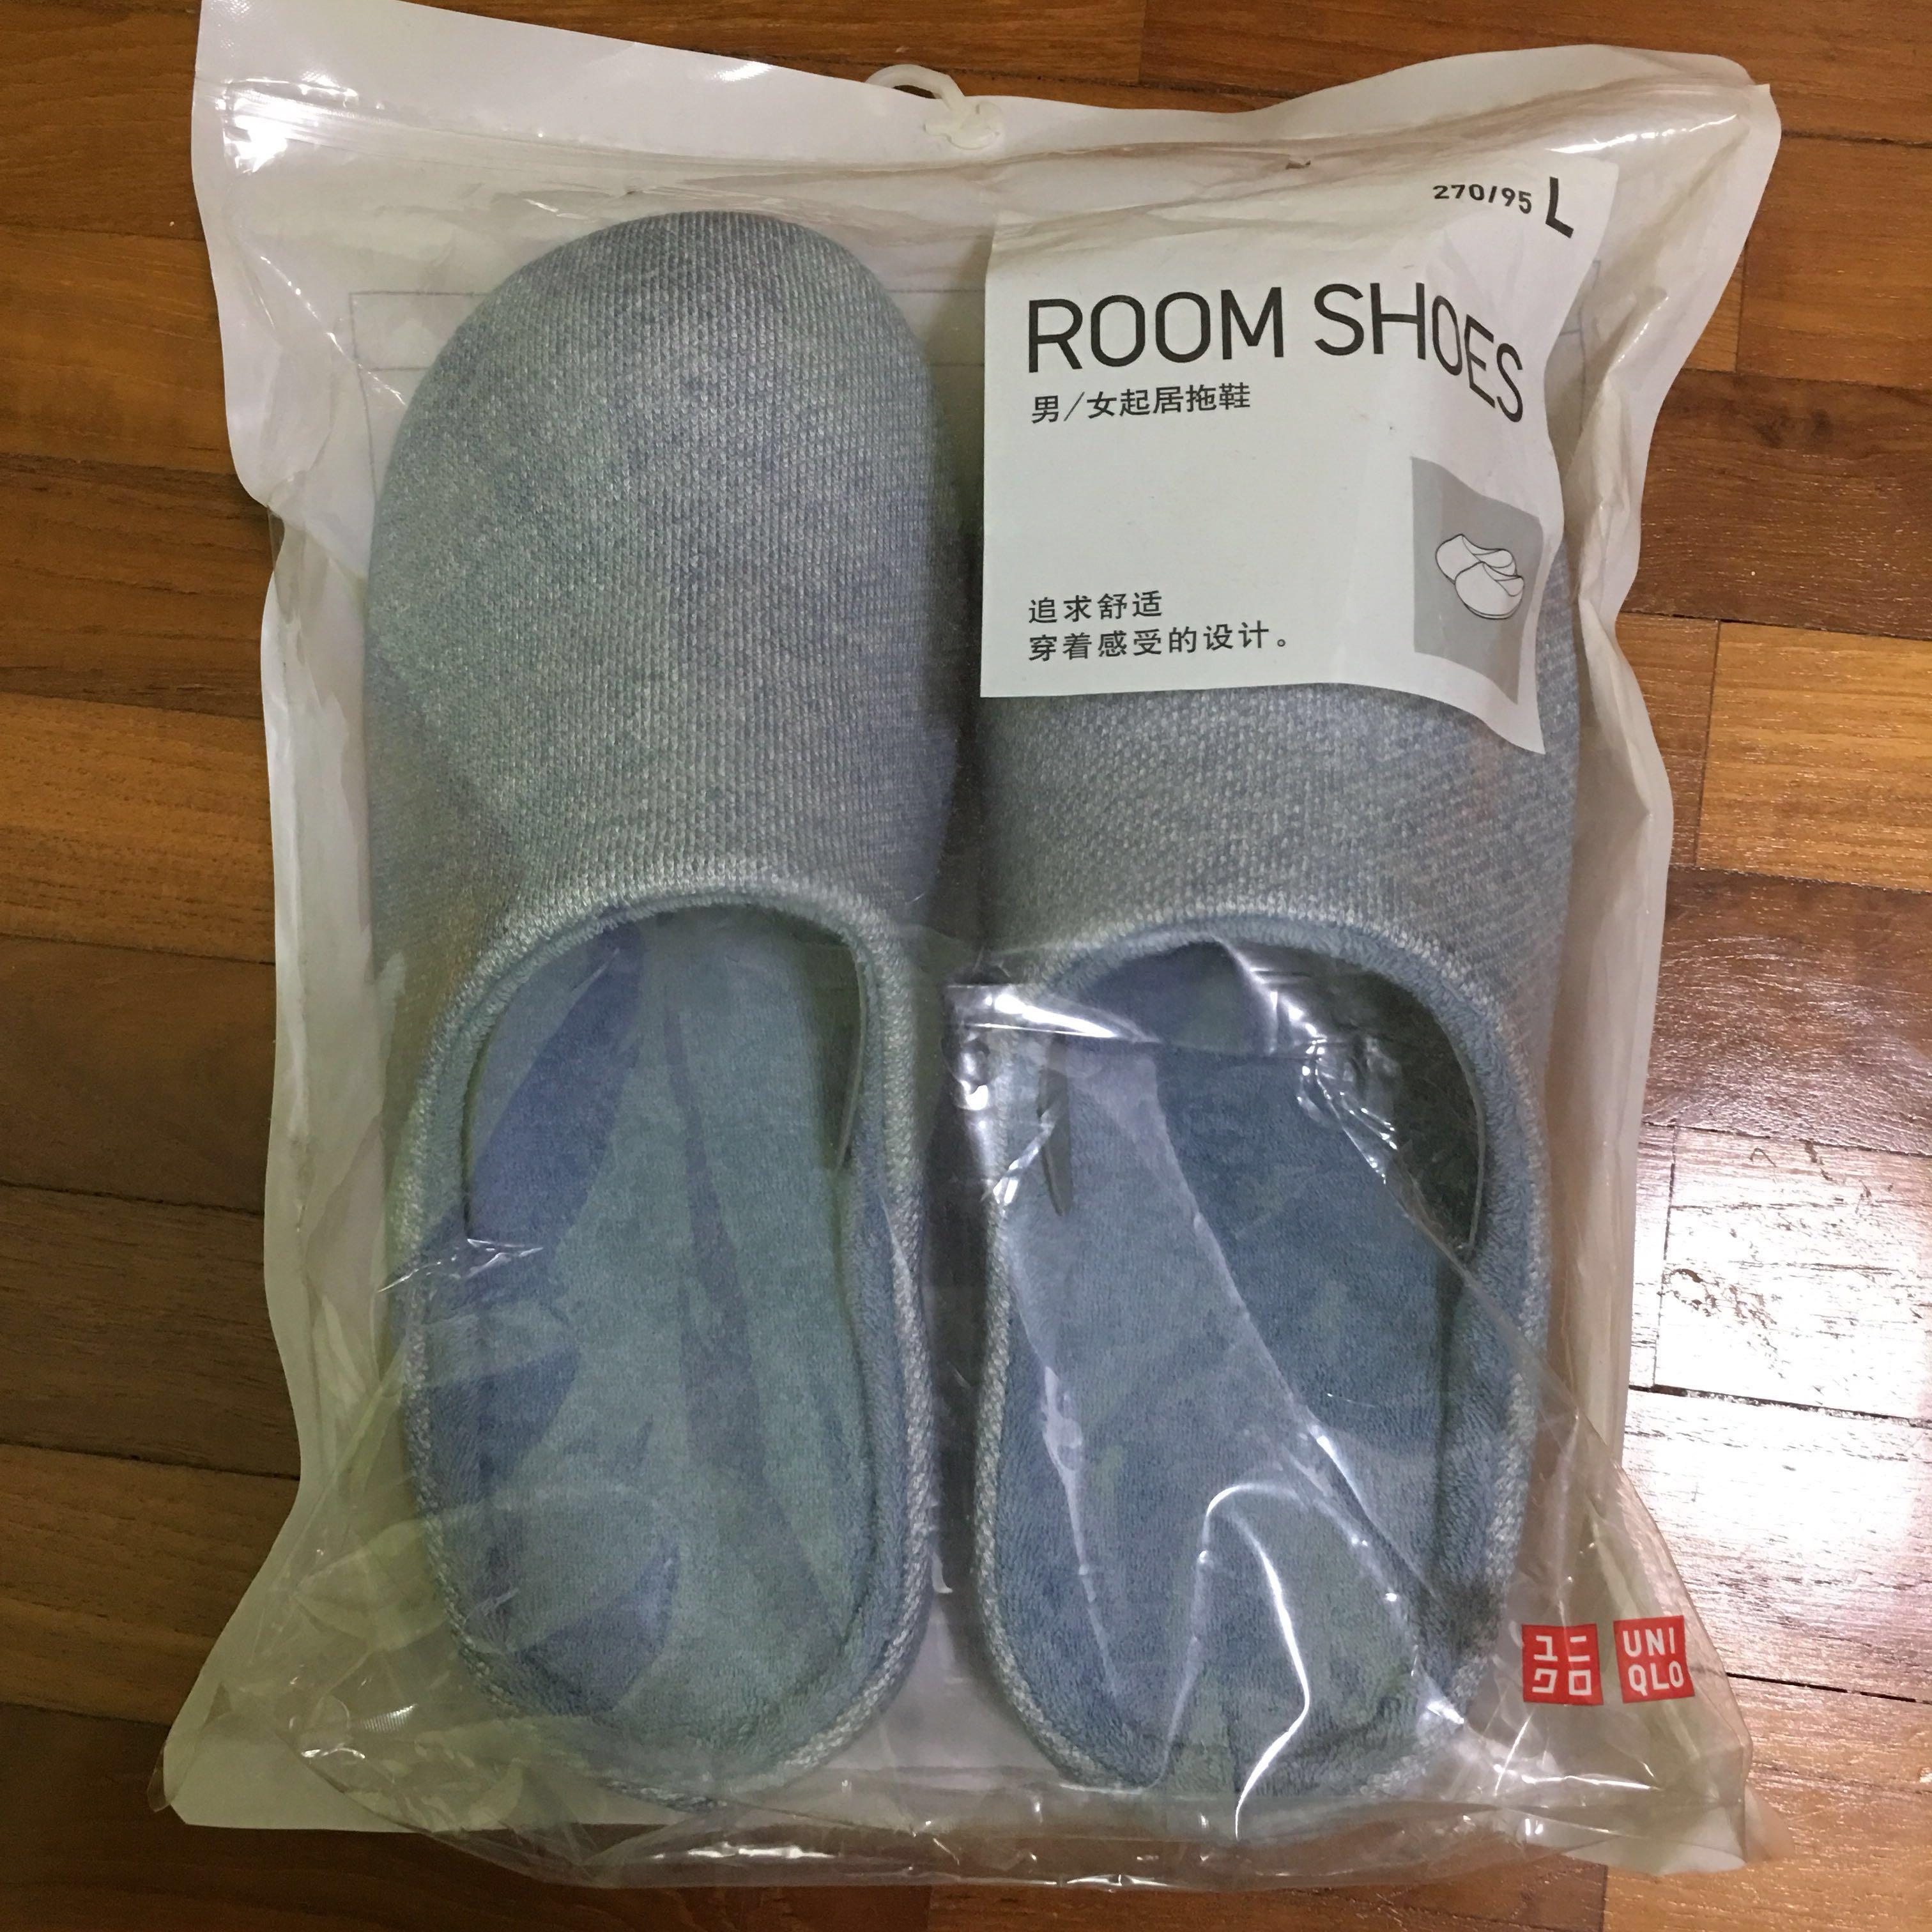 Uniqlo Room Shoes Bedroom Slippers Women S Fashion Shoes